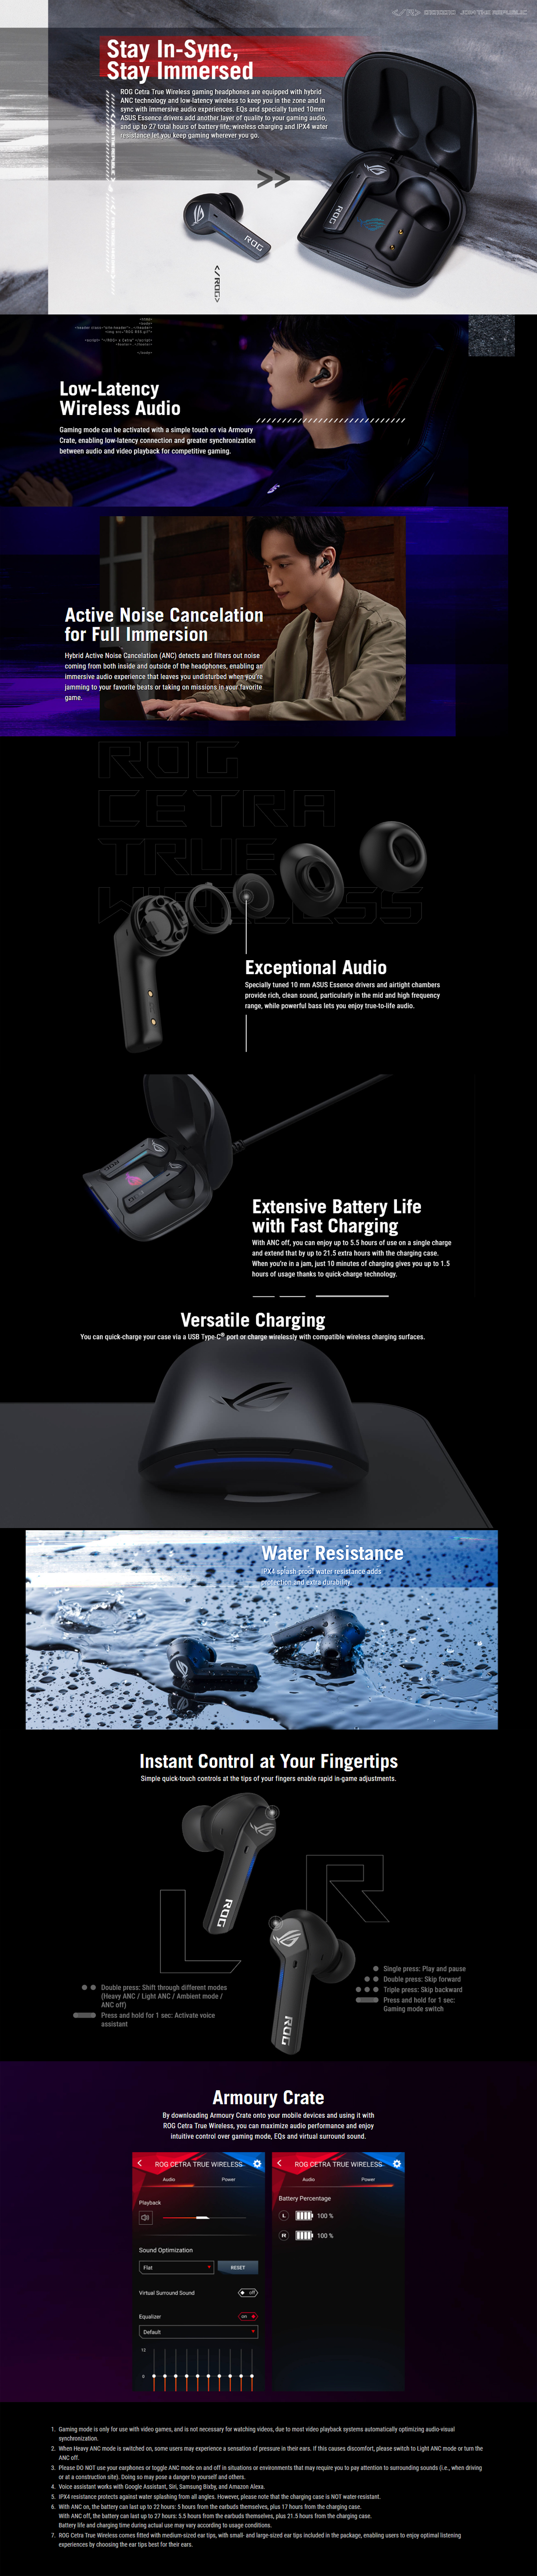 A large marketing image providing additional information about the product ASUS ROG Cetra True Wireless Earphones - Black - Additional alt info not provided